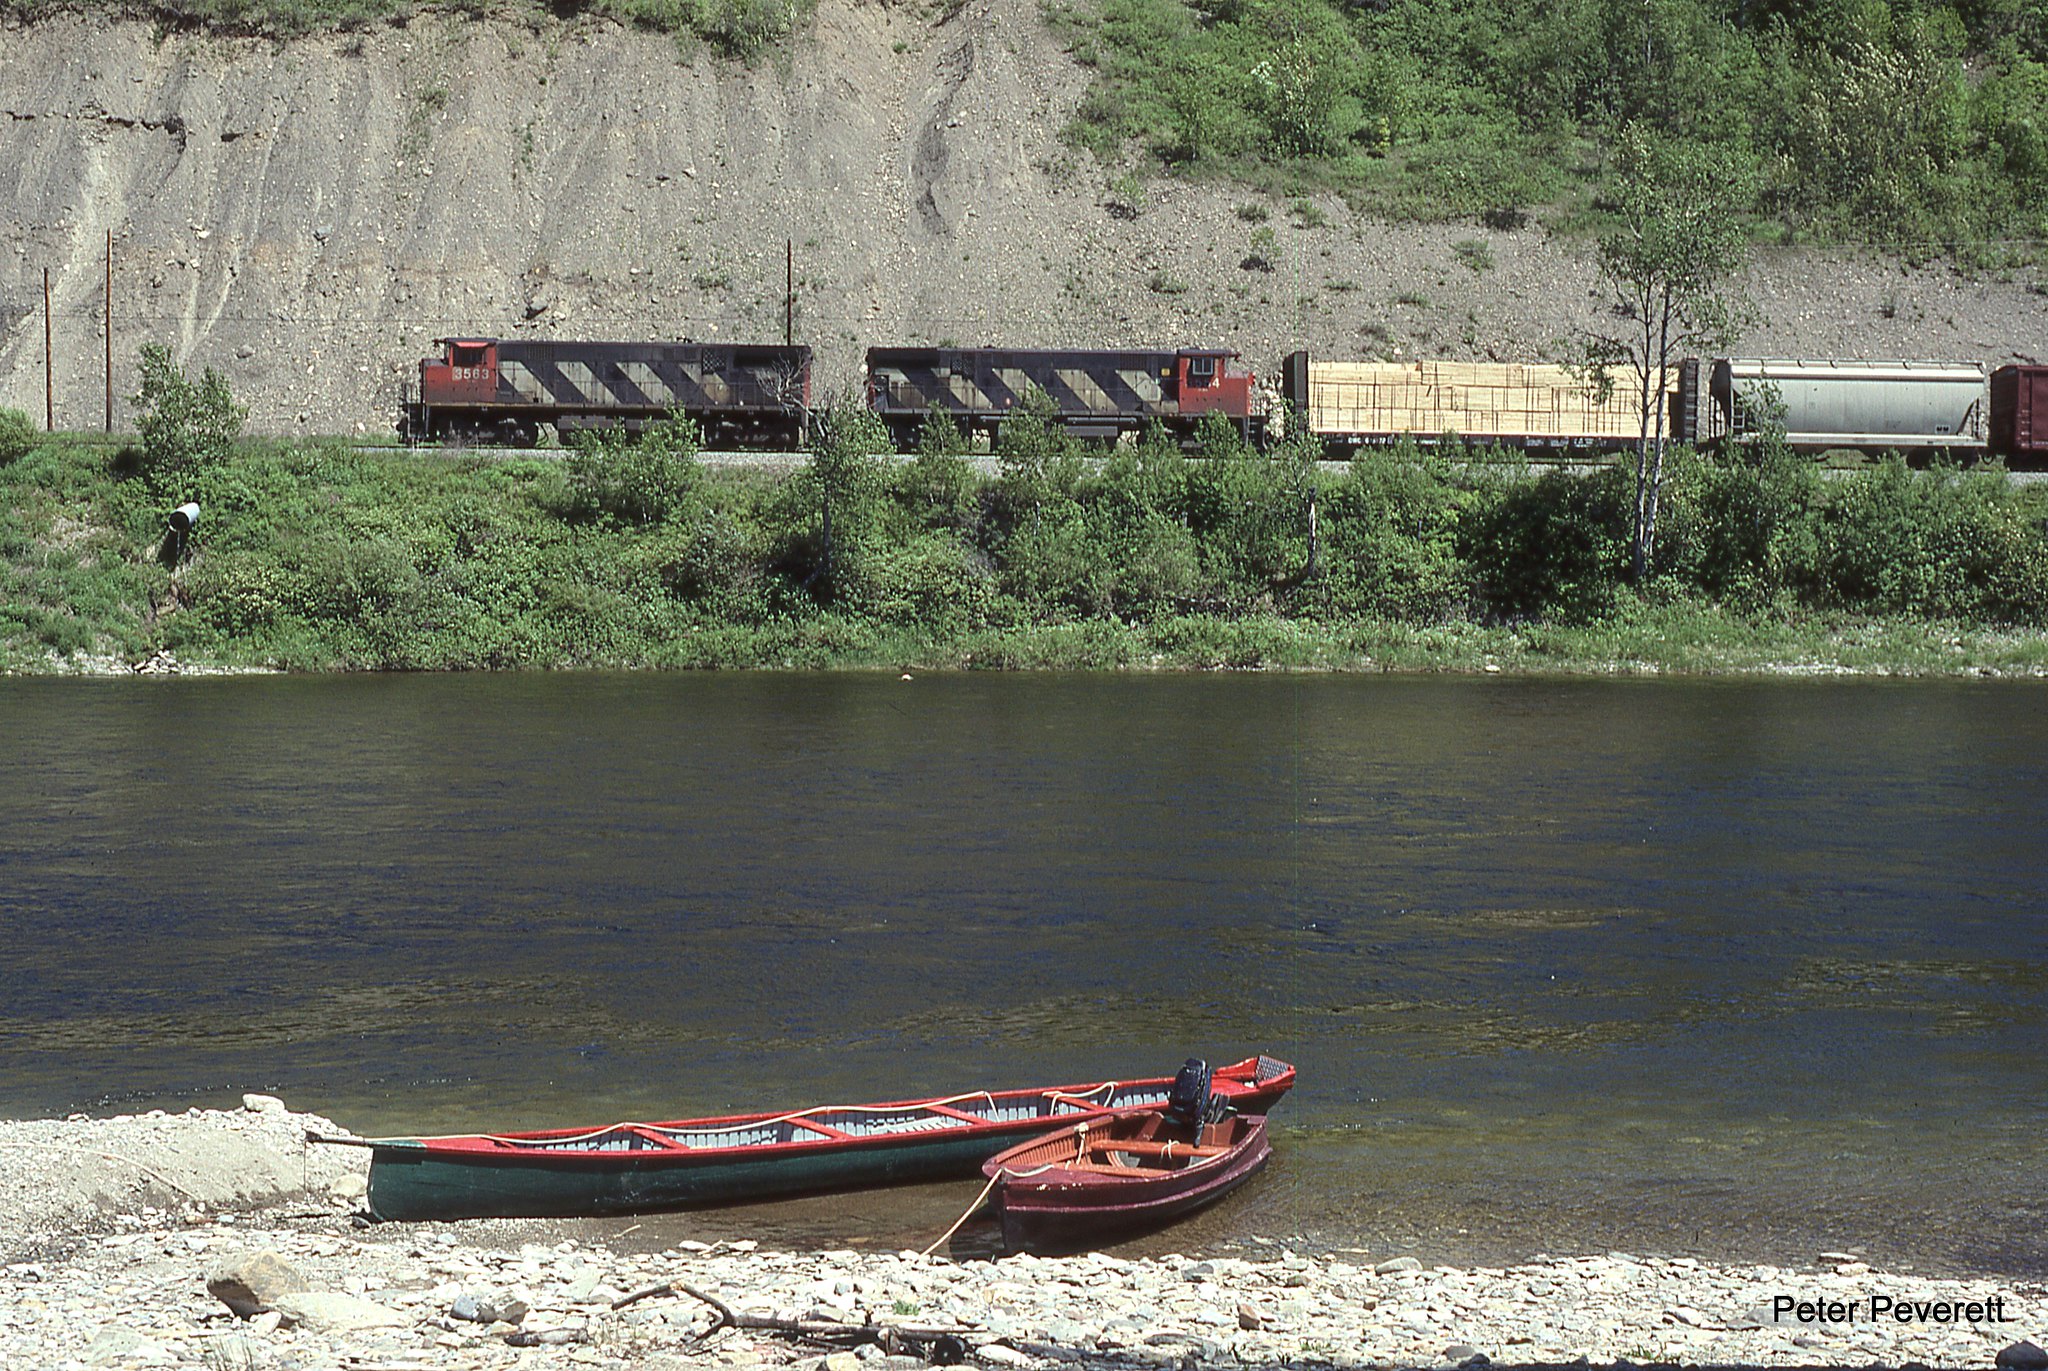 By my math 99 % of people visiting the Matapedia River Valley are there for world famous salmon fishing.  For the other 1 % there is some other reason. Not too long after CN sold its lines between Mont Joli - Moncton and Matapedia - Gaspe we see Chaleur Bay Railway w/ CN M-420 # 3563, 3554 at Clark Brook, Quebec June 9, 1998.  Here they will meet a Matapedia Railway train out of Mont Joli and swap cars.  The train is passing a long square stern canoe common to the area for the other 99%s'. 